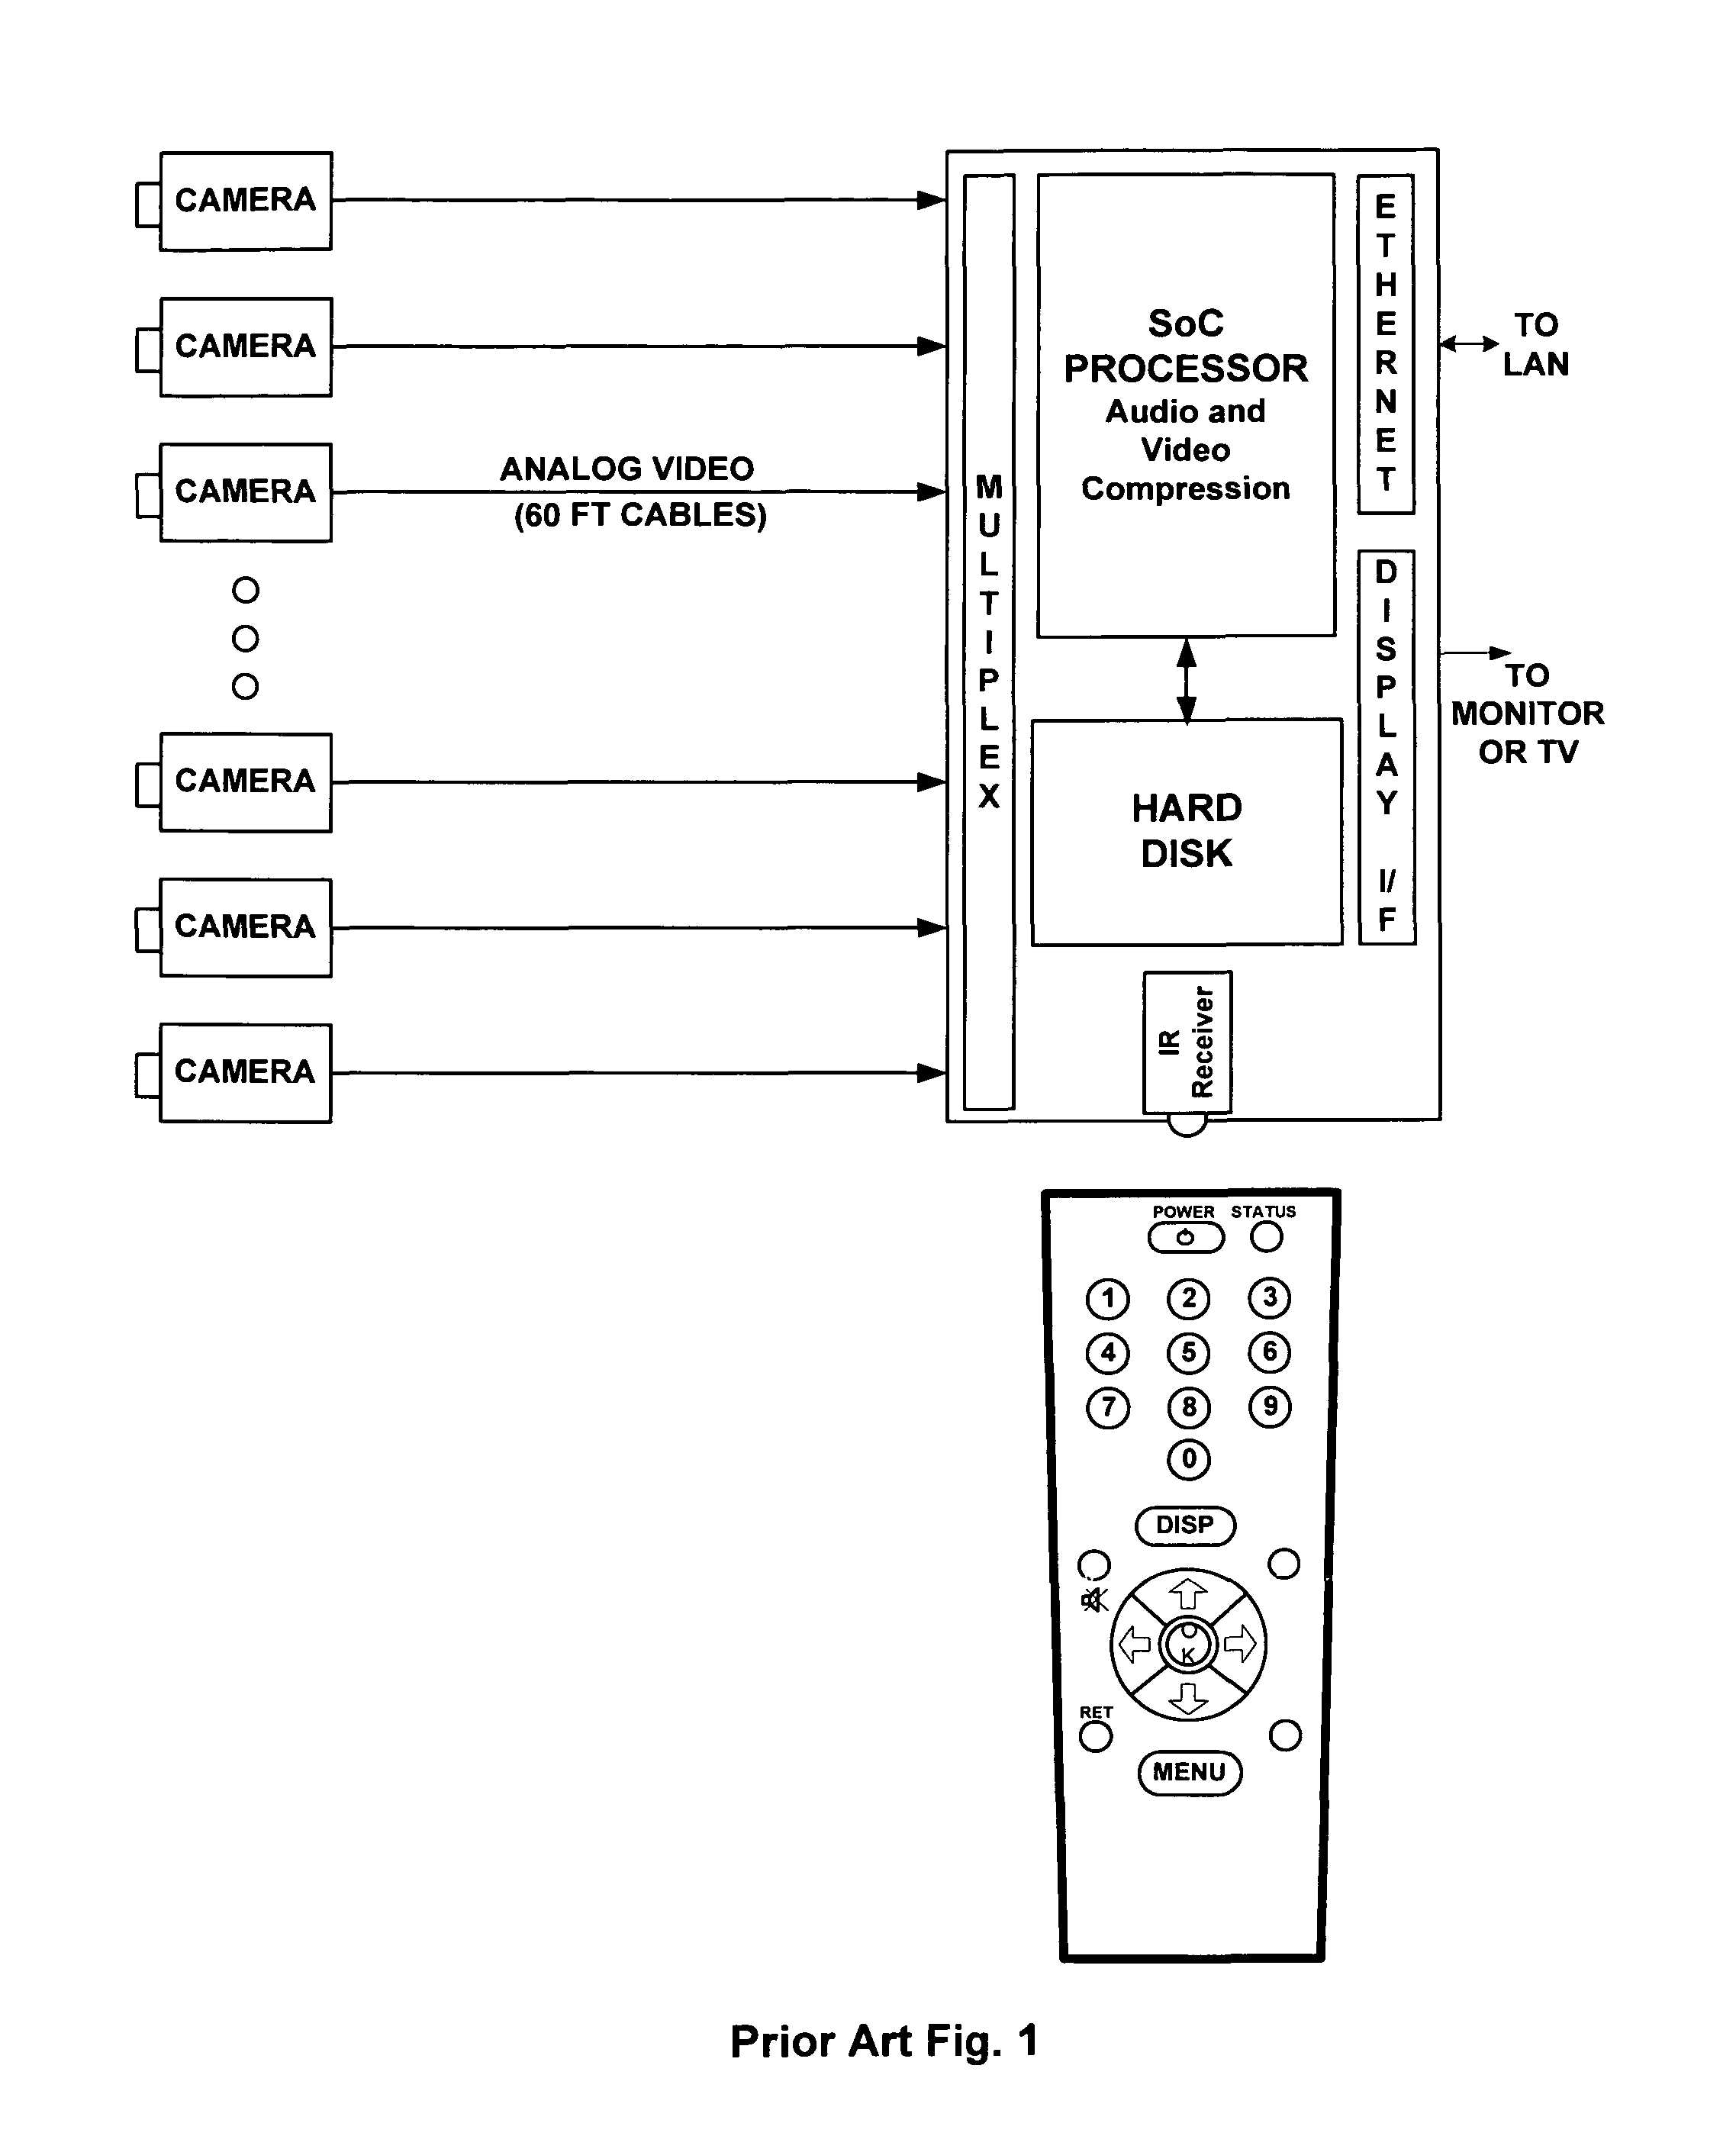 Networked security camera with local storage and continuous recording loop